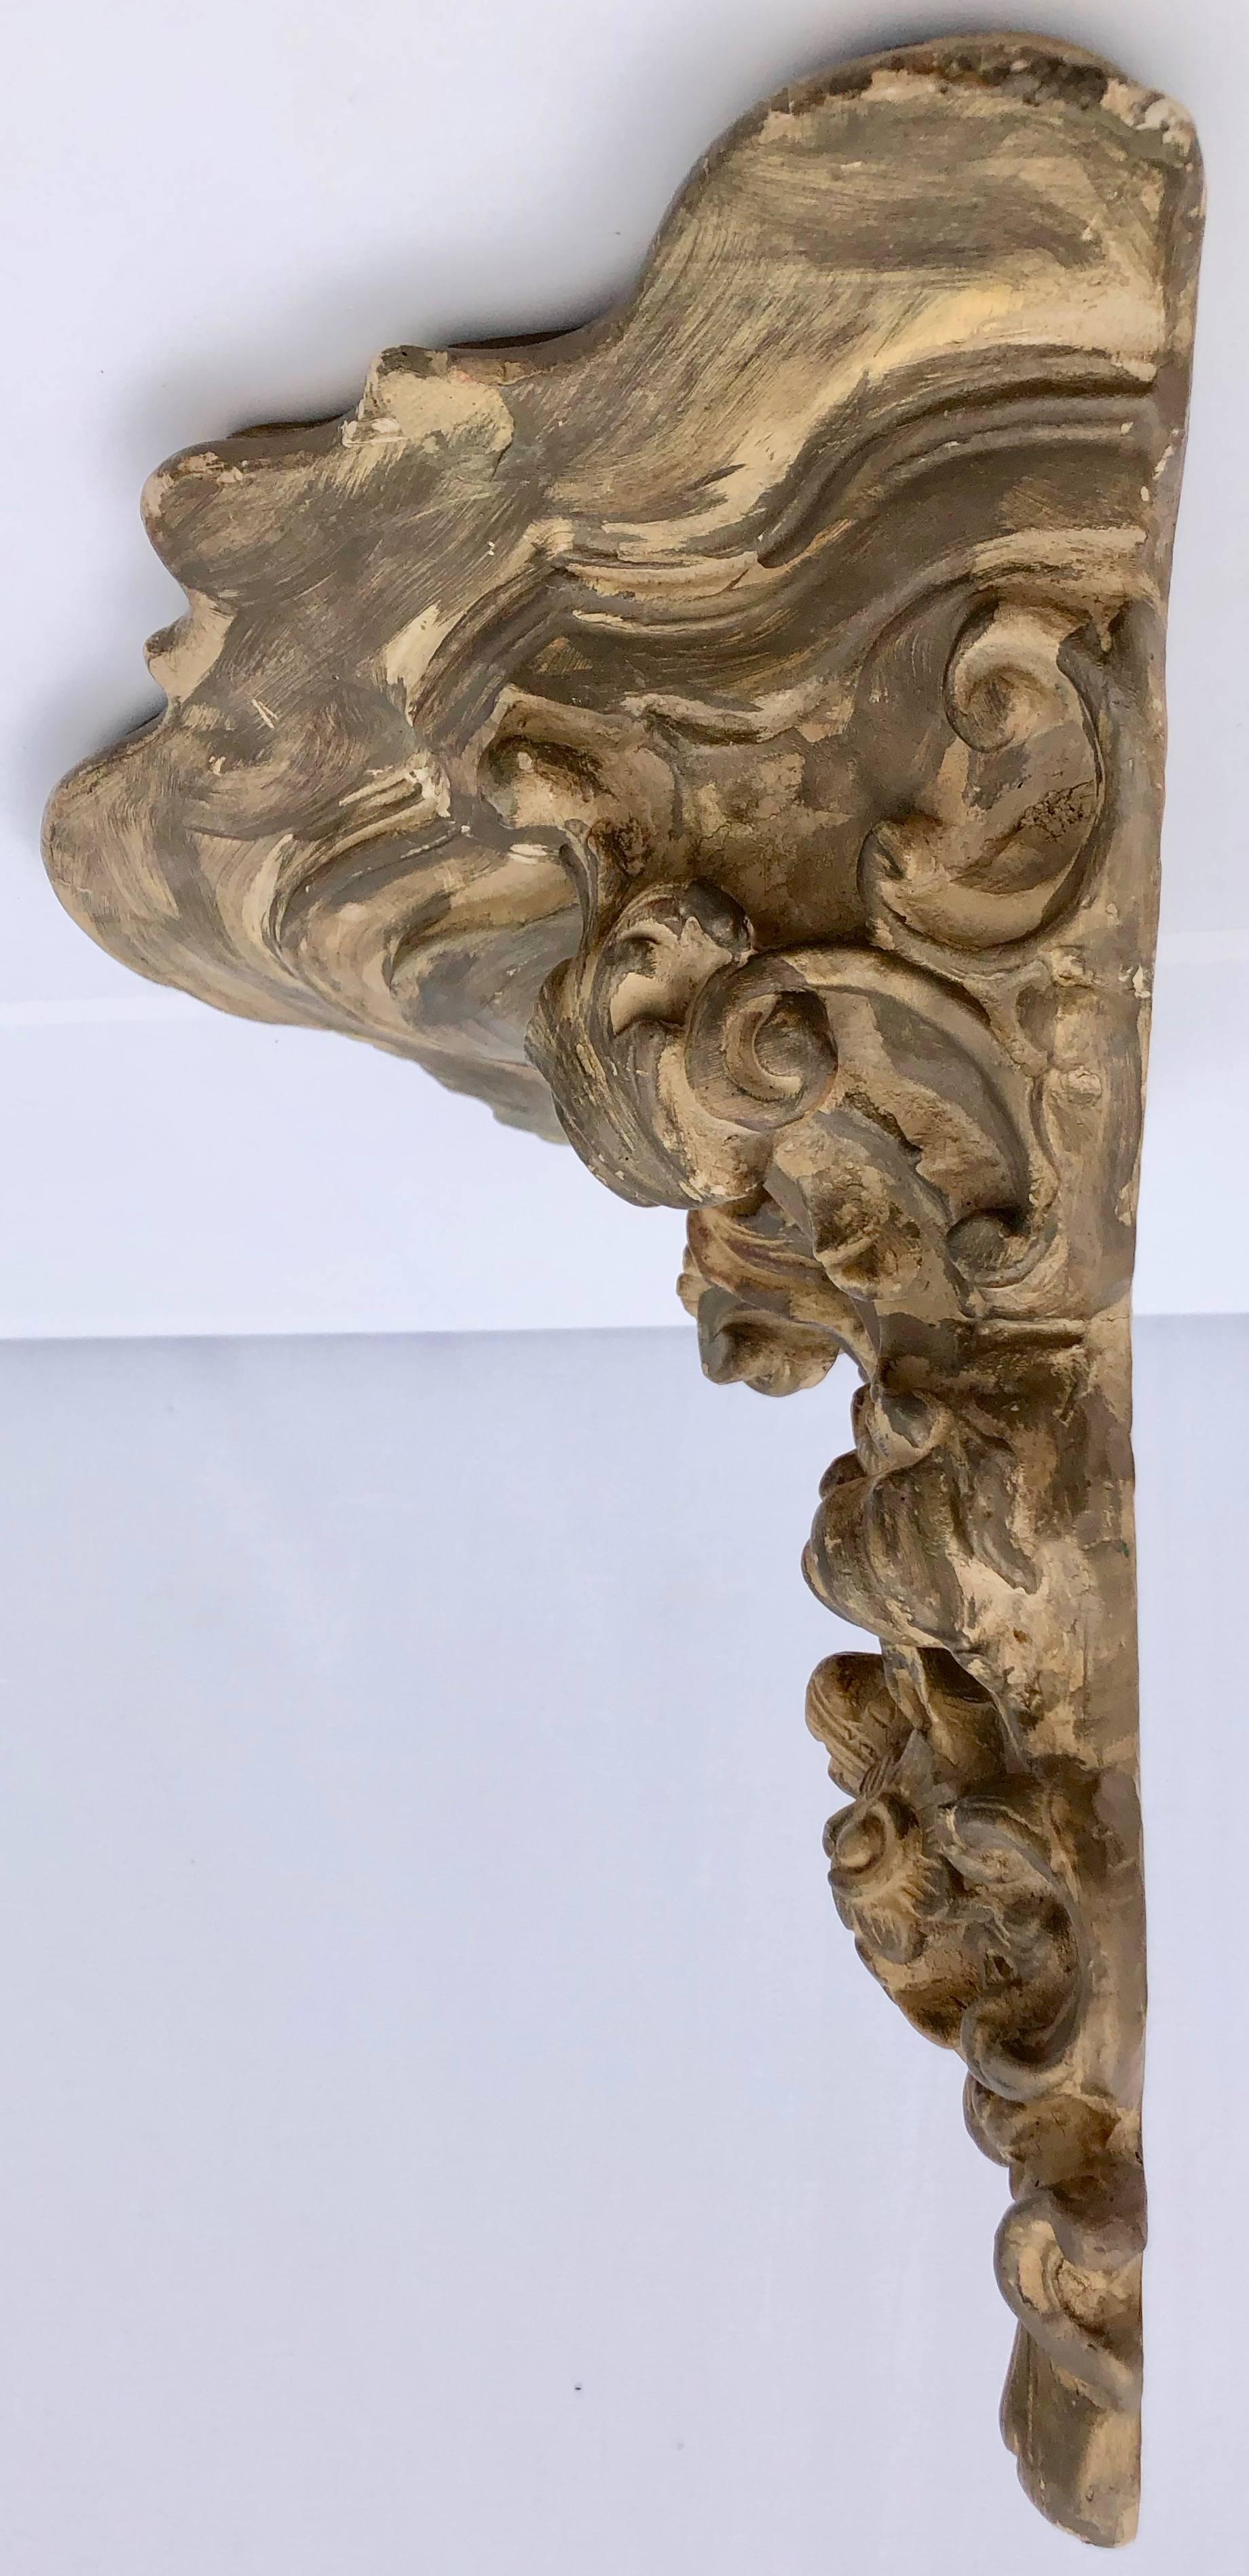 Terracotta French Wall Sconce in Terra Cotta with Floral and Scroll Design, Mid-1900s For Sale